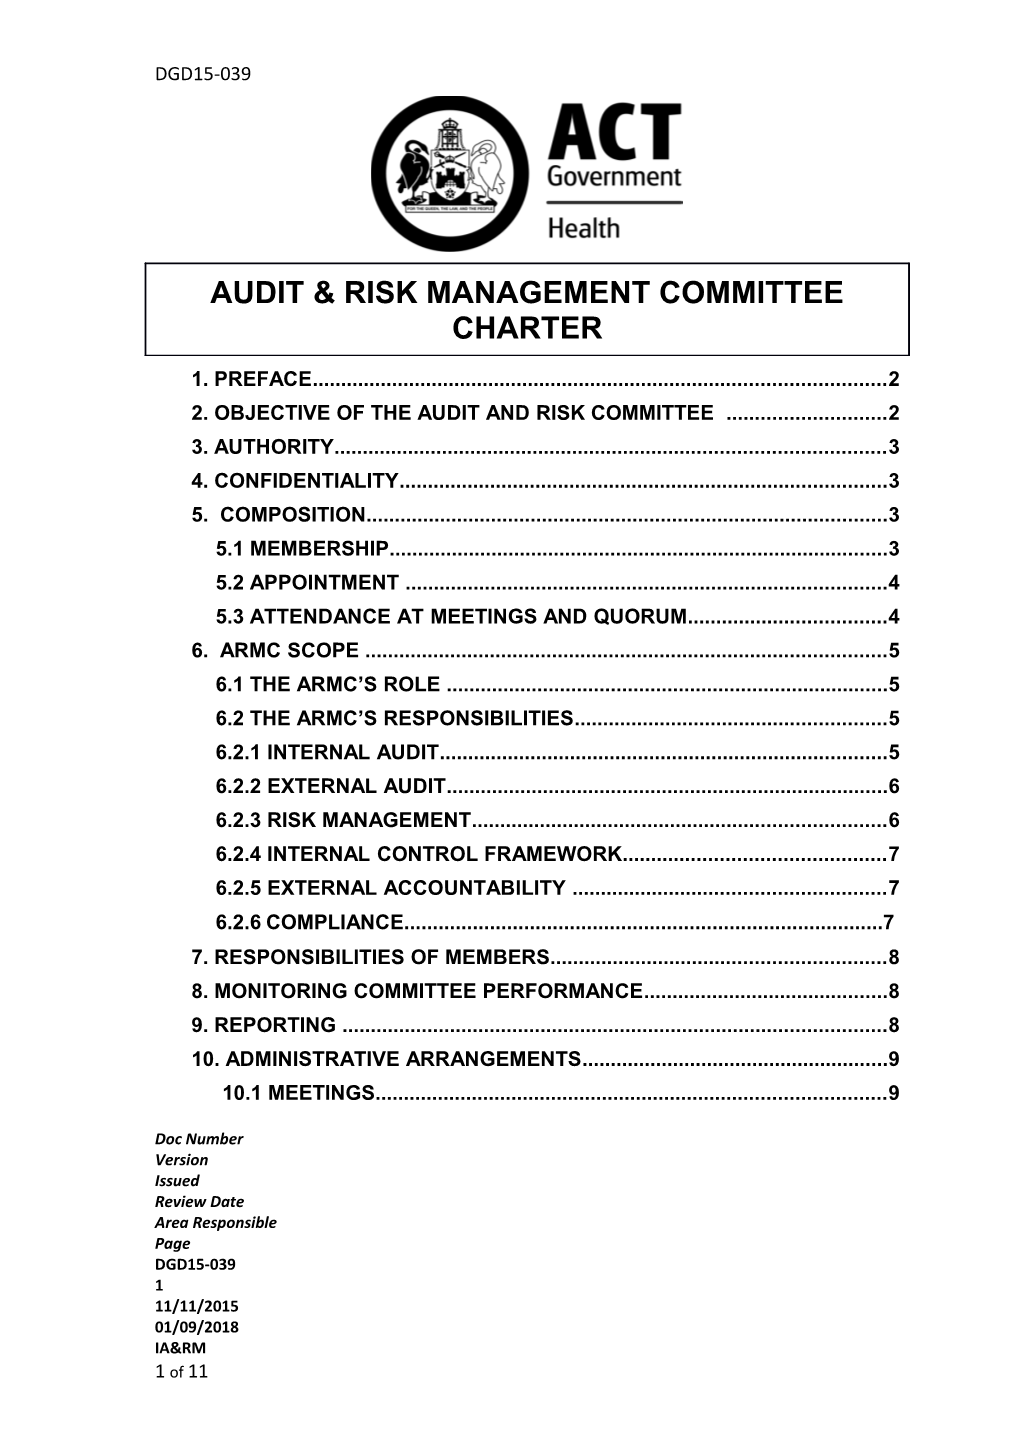 Audit and Risk Management Committee Charter